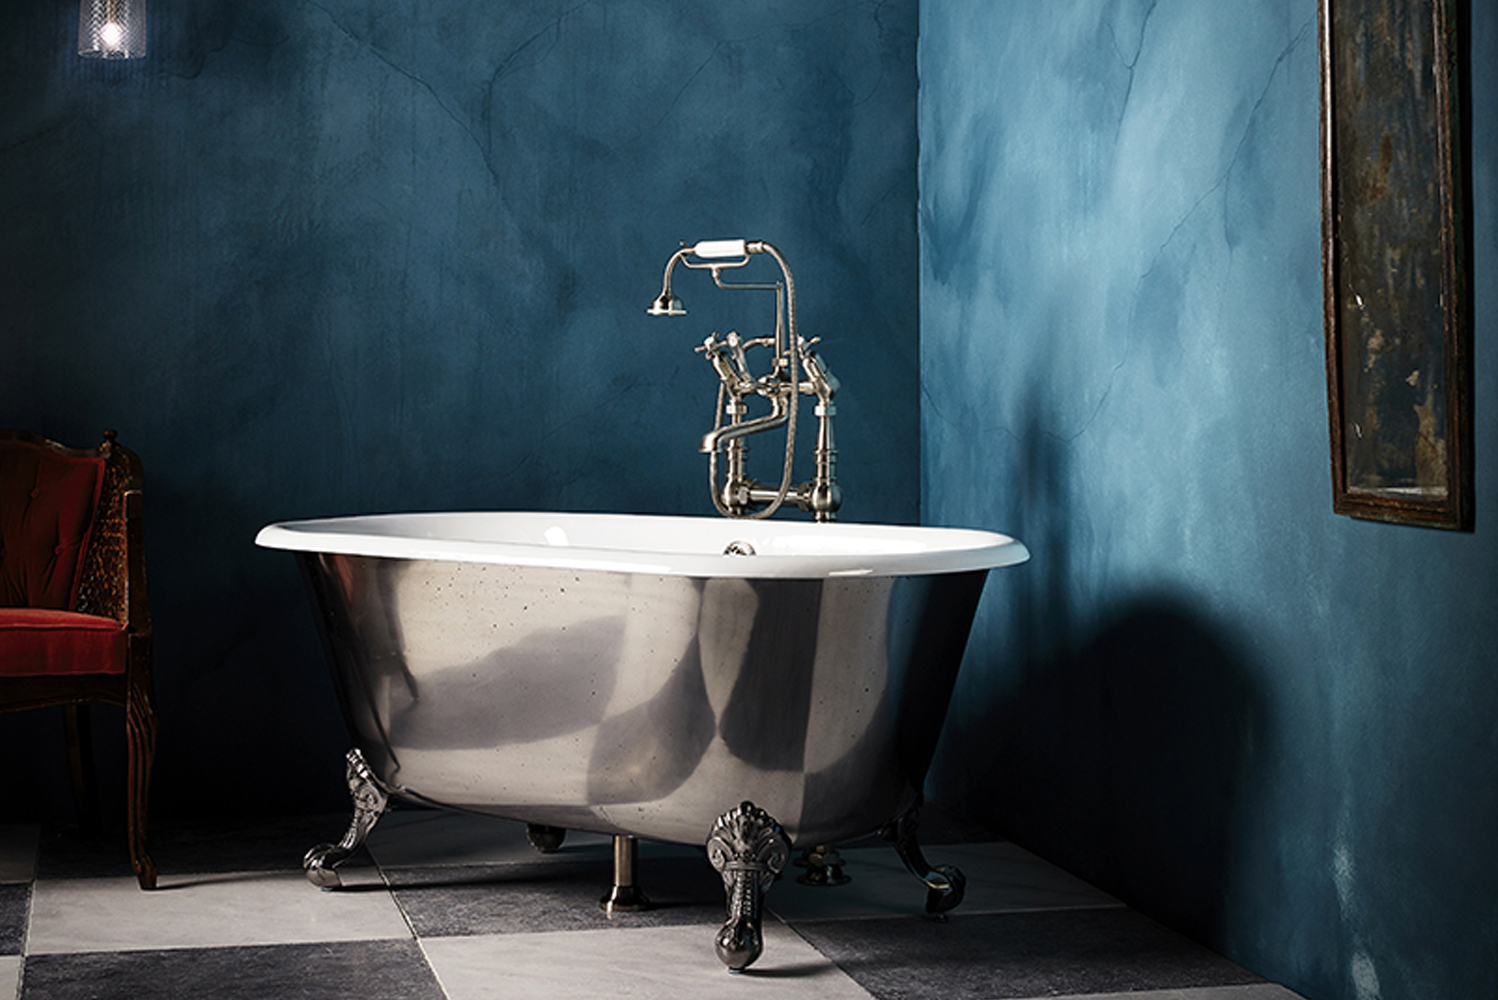 Drummonds introduces the Ashburn bathtub which comes in four bespoke finish options